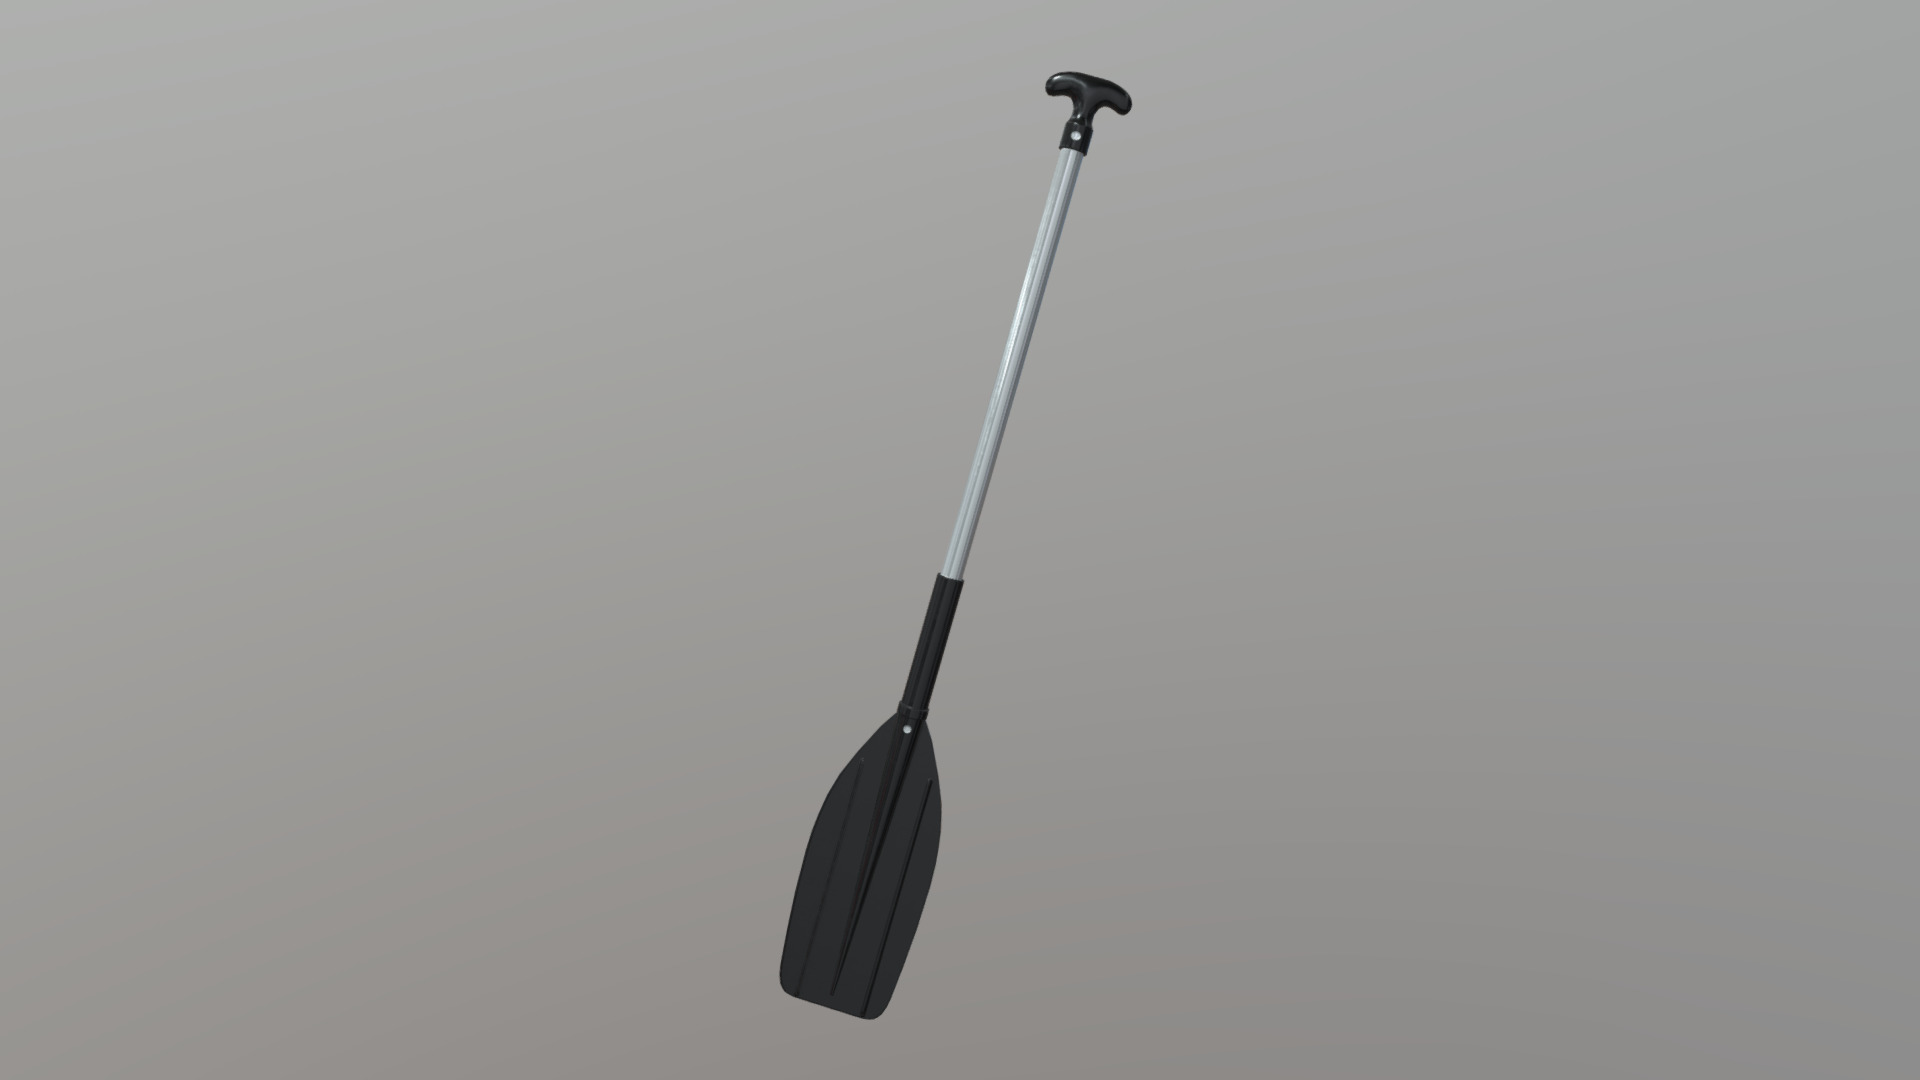 3D model Paddle 2 - This is a 3D model of the Paddle 2. The 3D model is about a sword with a black handle.